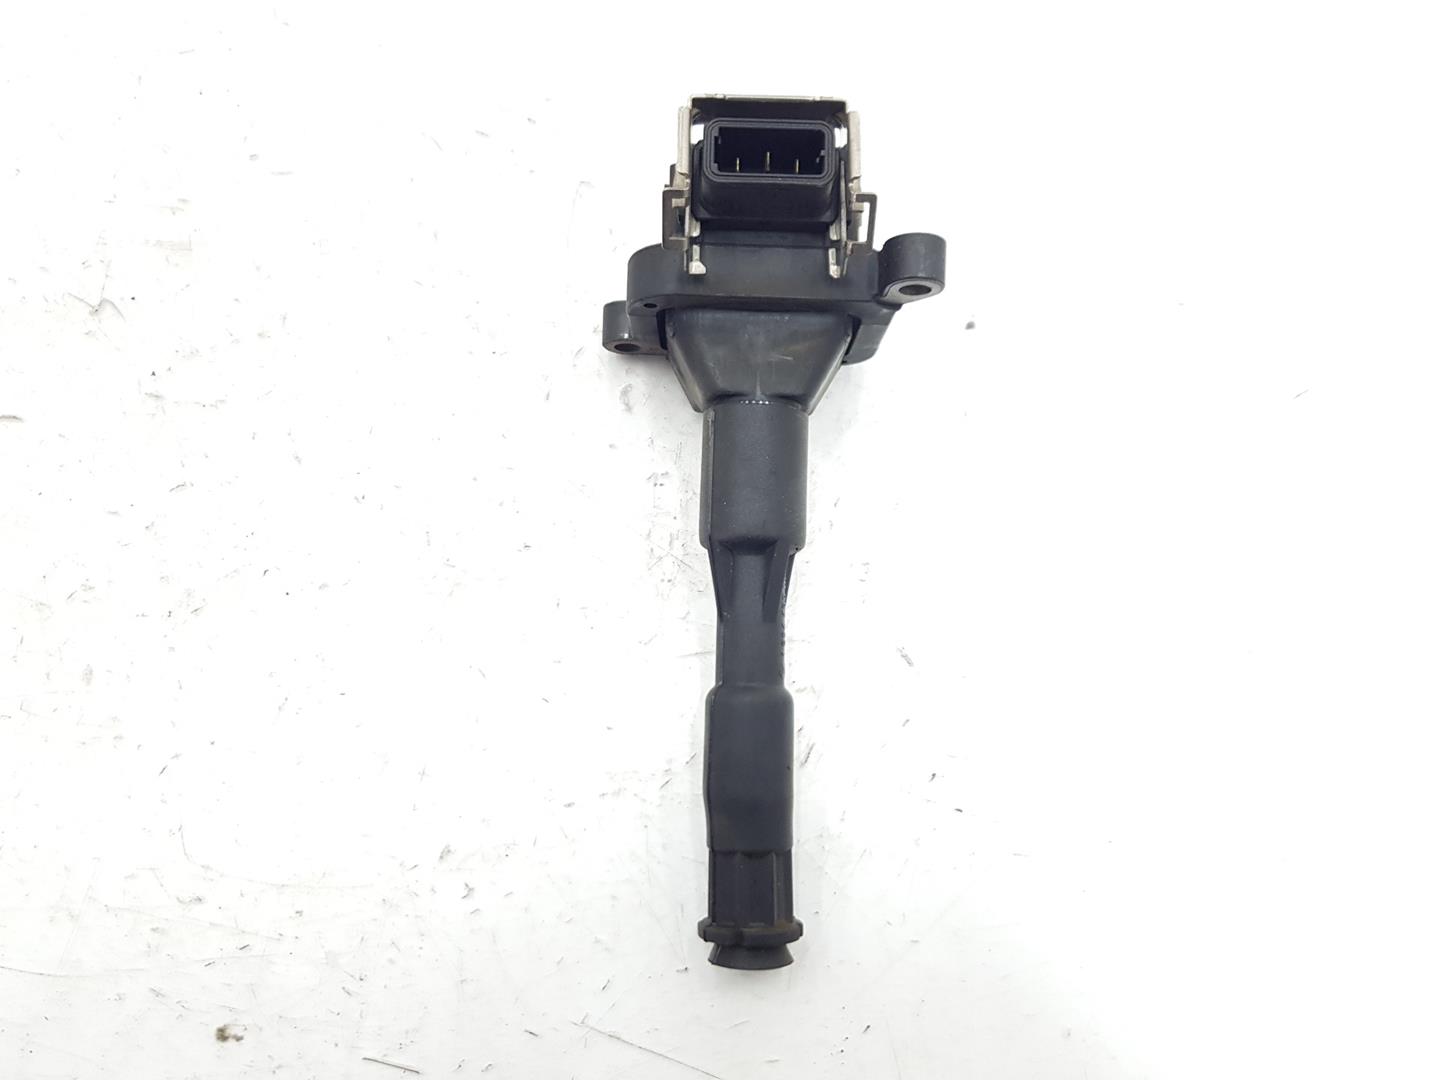 BMW 5 Series E39 (1995-2004) High Voltage Ignition Coil 12131740477, 1703227, 0221504004 19812257